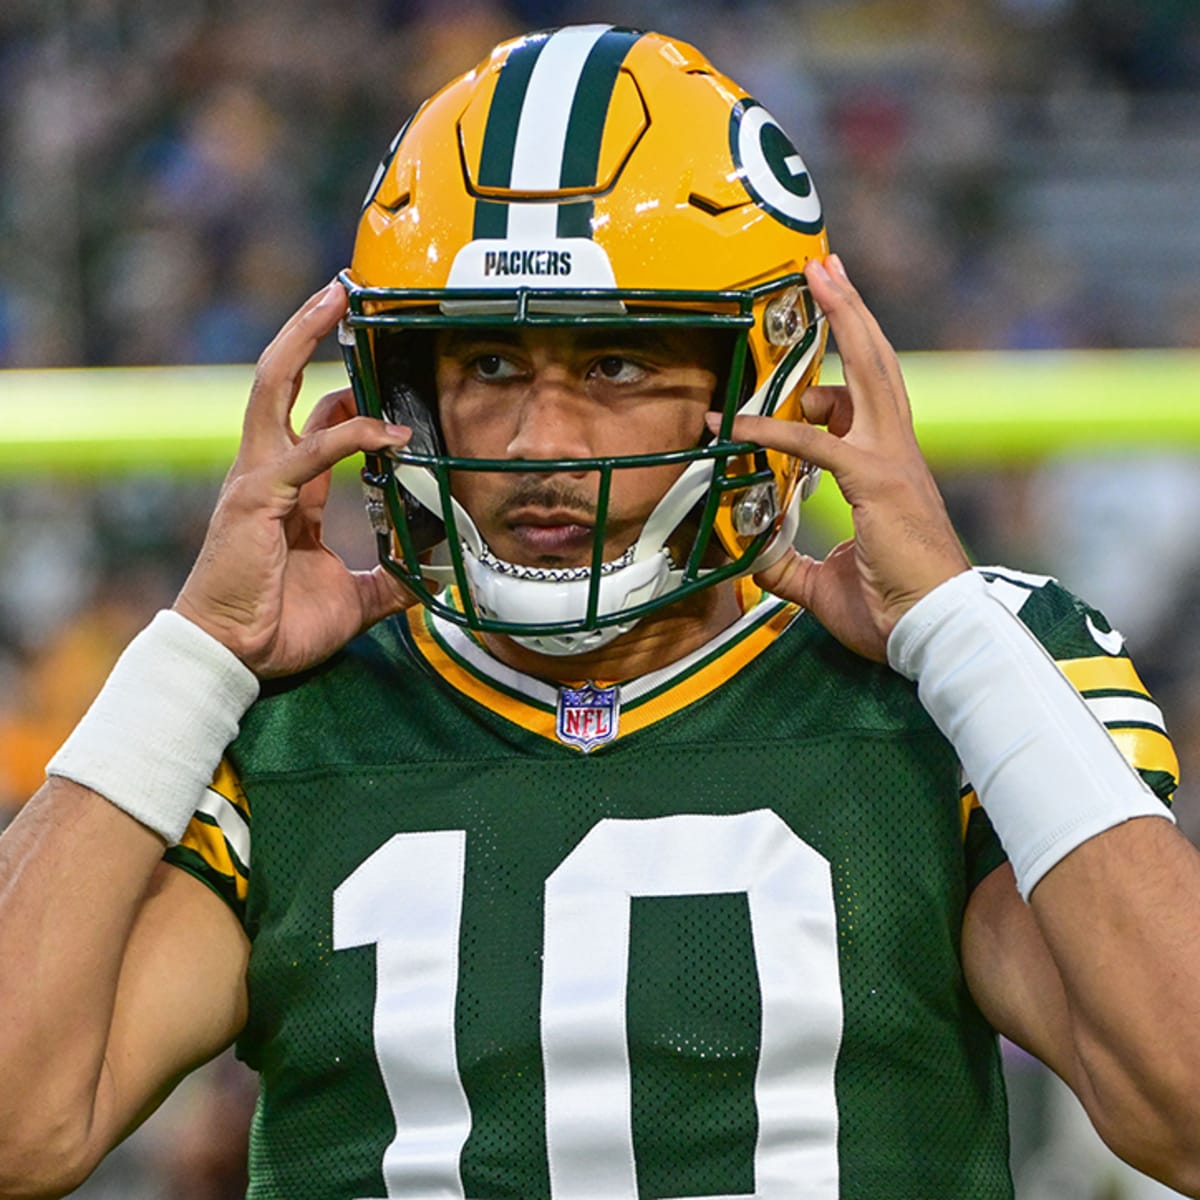 Packers vs. 49ers final score: San Francisco crushes Green Bay on